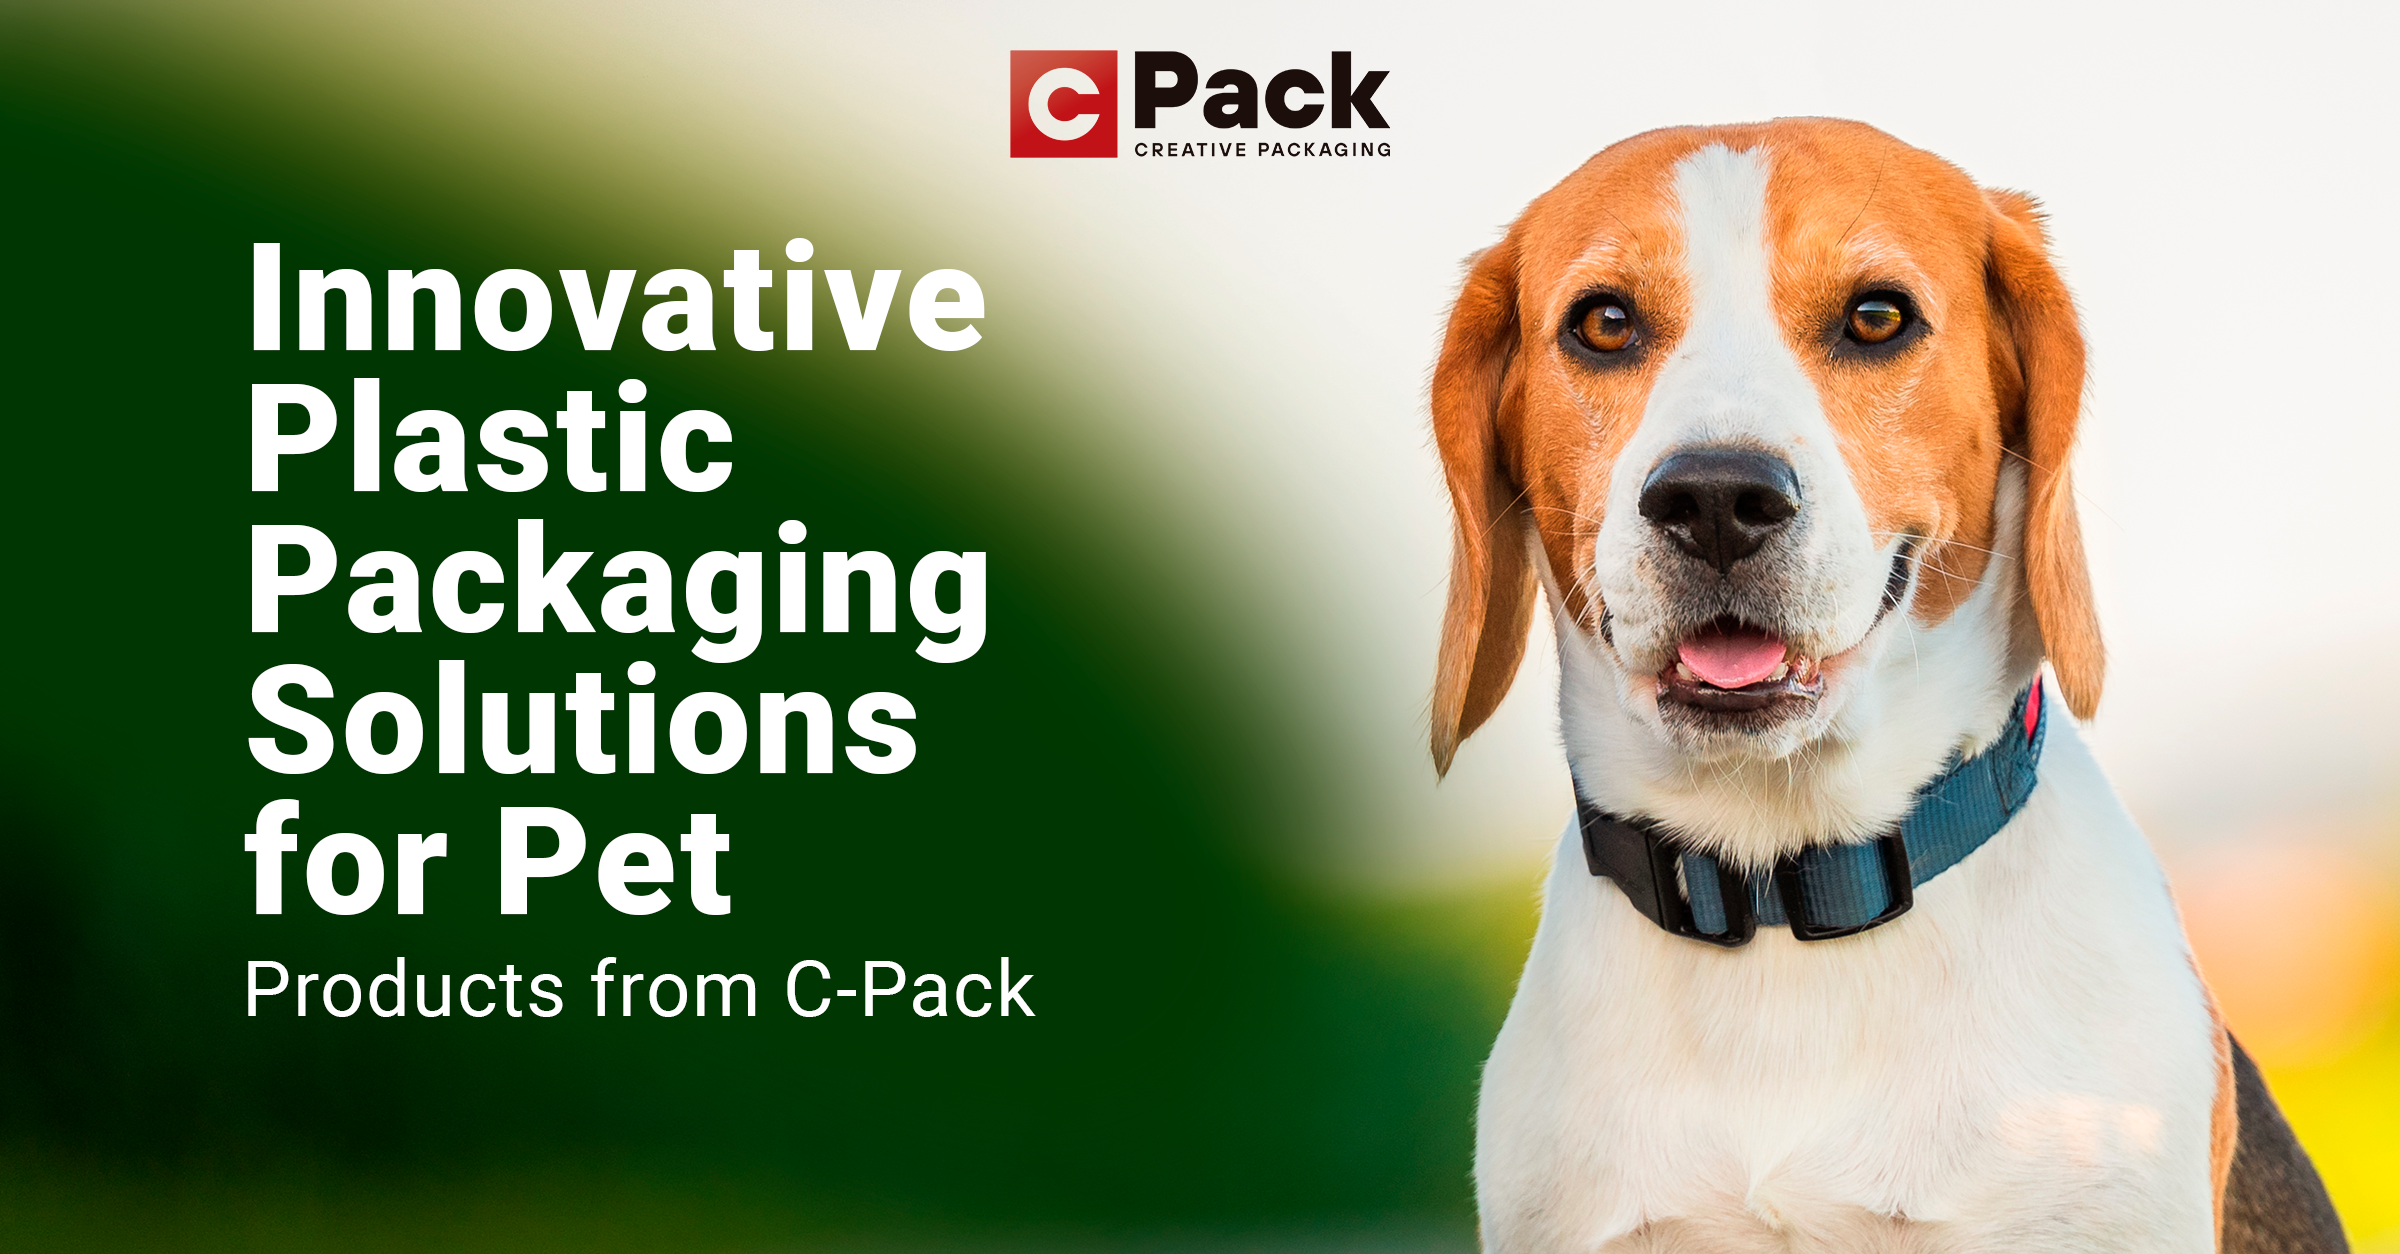 Image showcasing C-Pack's innovative plastic packaging solutions designed for pets.